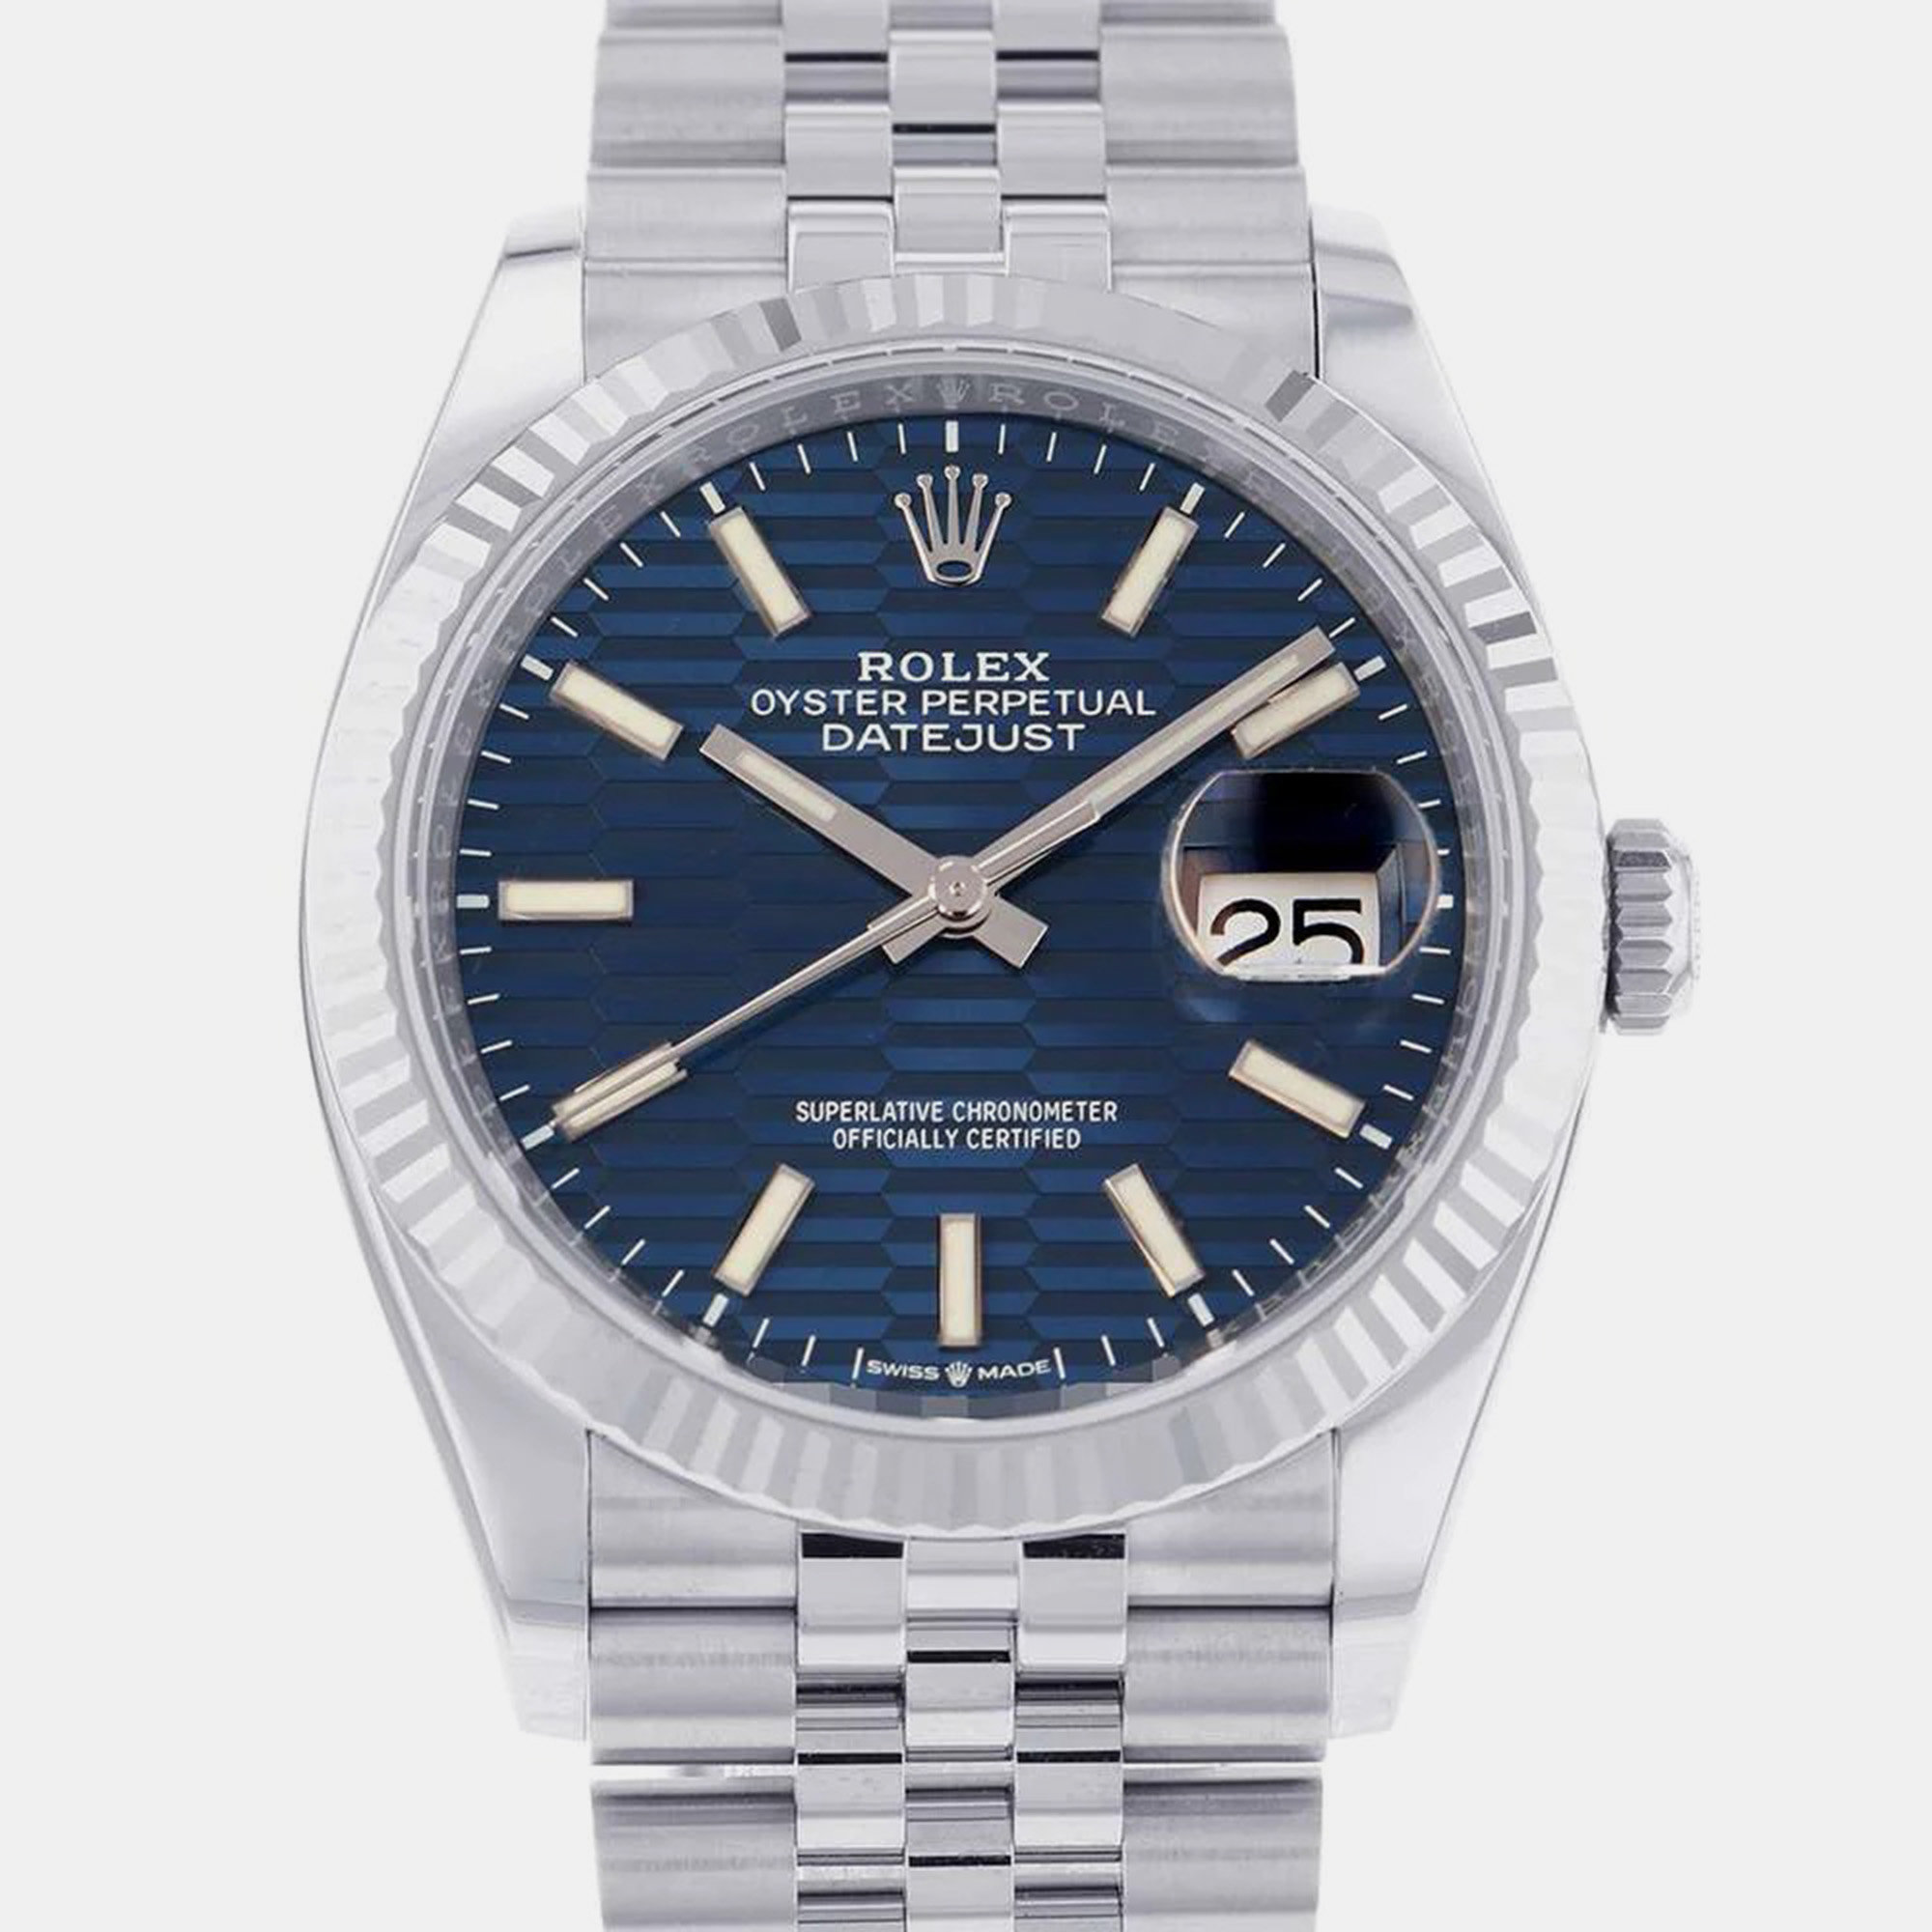 Experience the epitome of horological excellence with a genuine Rolex watch. Immaculately engineered it combines iconic aesthetics precision movement and enduring luxury in one timeless masterpiece.